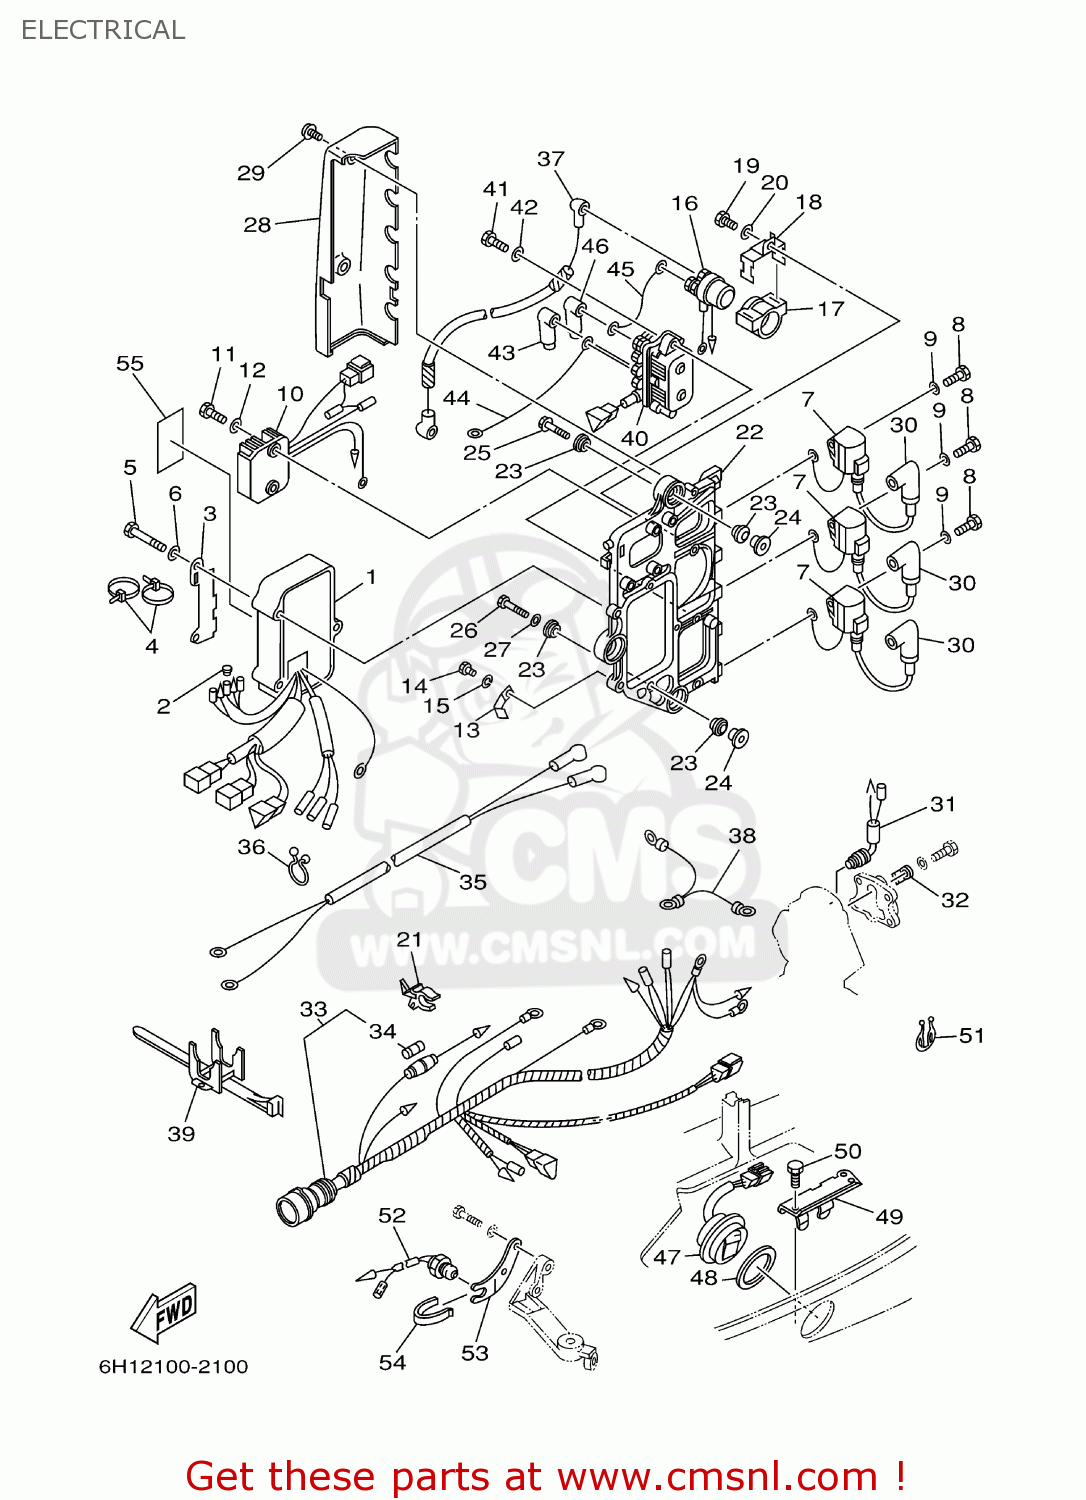 Yamaha 90tlrb 2003 Electrical - schematic partsfiche